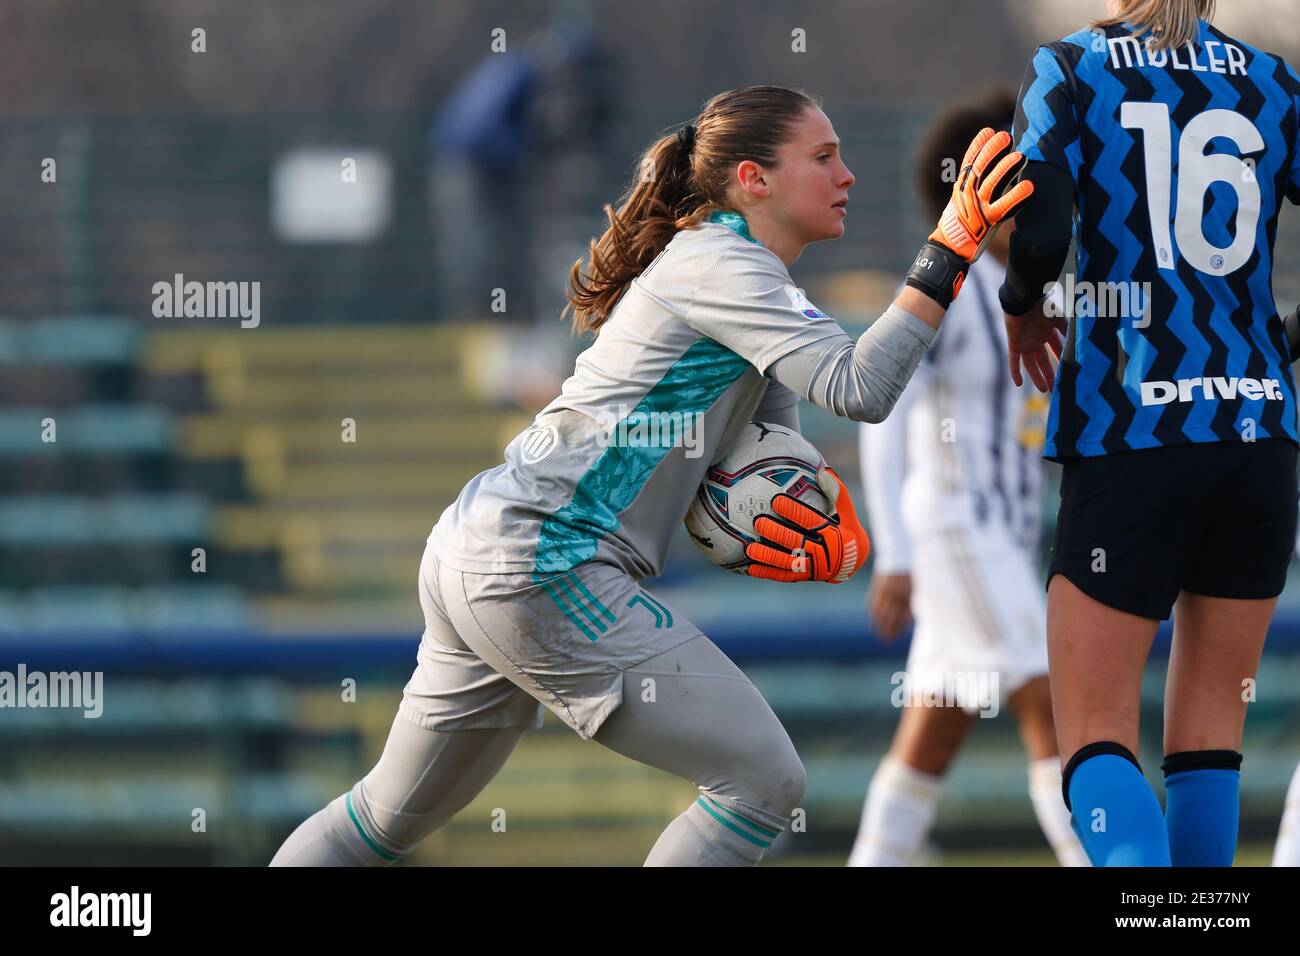 Milan, Italy. 17th Jan, 2021. Milan, Italy, Suning Youth Development Centre in Memory of Giacinto Facchetti, January 17, 2021, Laura Giuliani (Juventus FC) during FC Internazionale vs Juventus Women - Italian football Serie A Women match Credit: Francesco Scaccianoce/LPS/ZUMA Wire/Alamy Live News Stock Photo